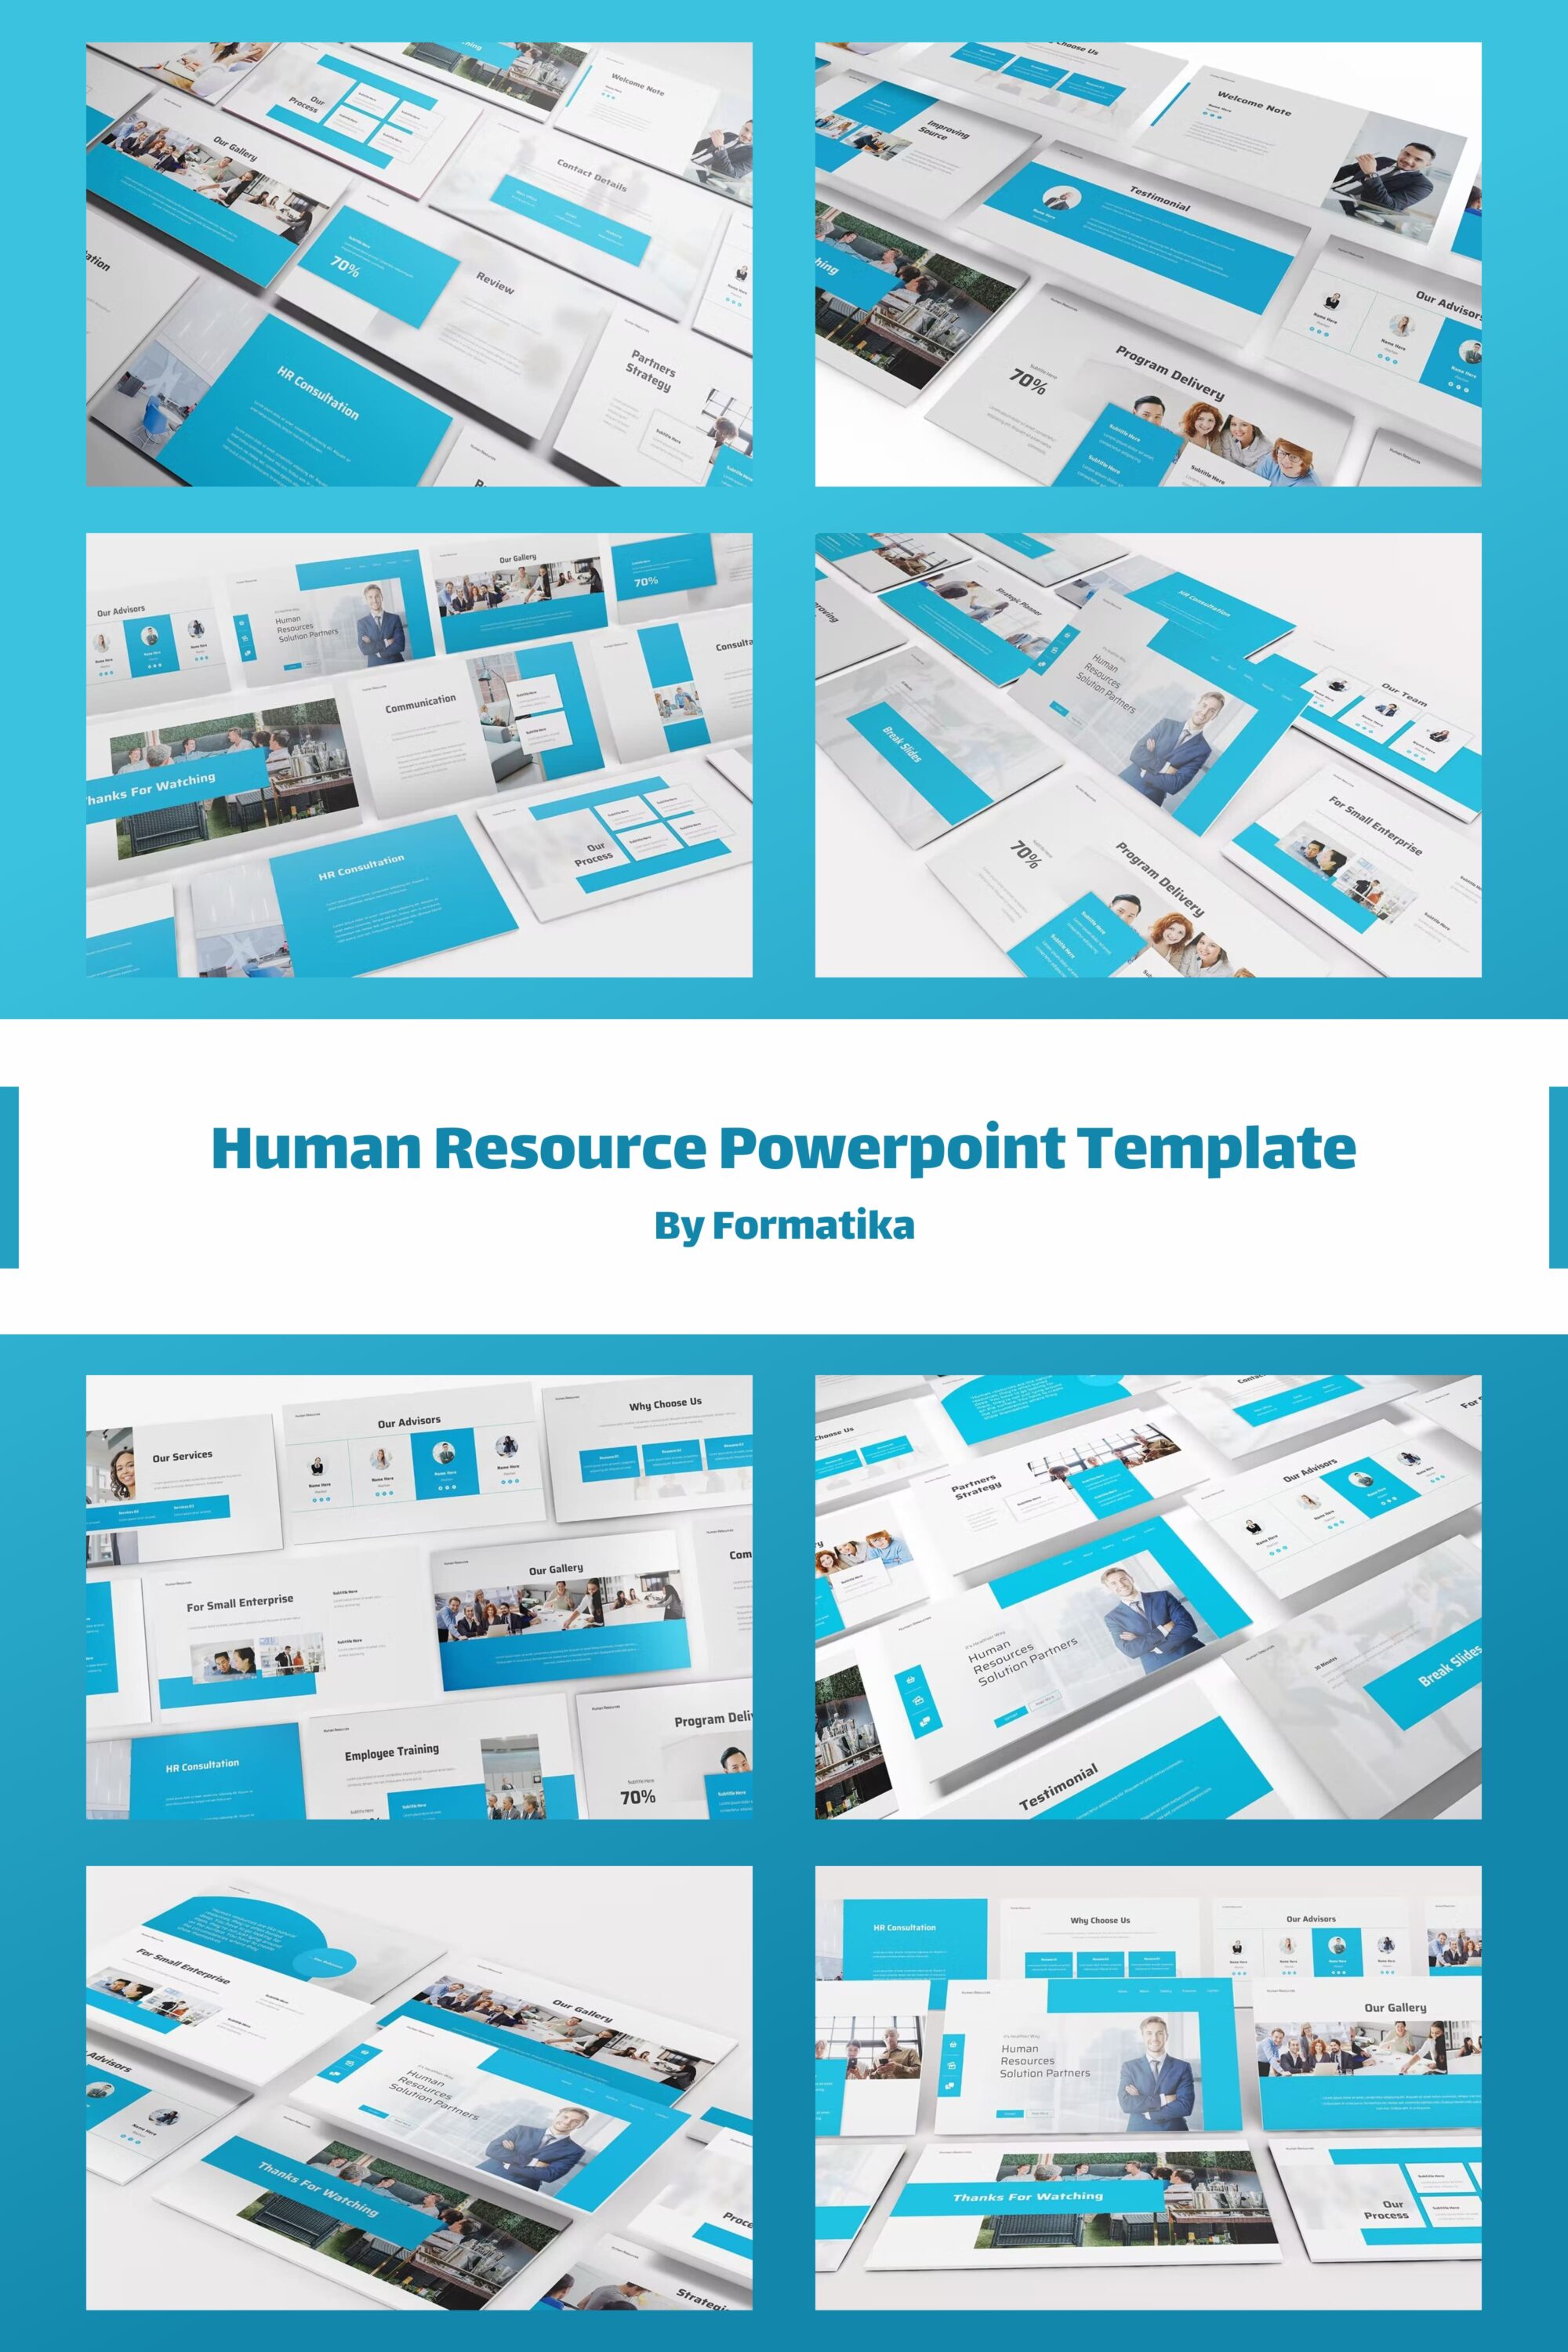 Human Resource Powerpoint Template Preview Pinterest.